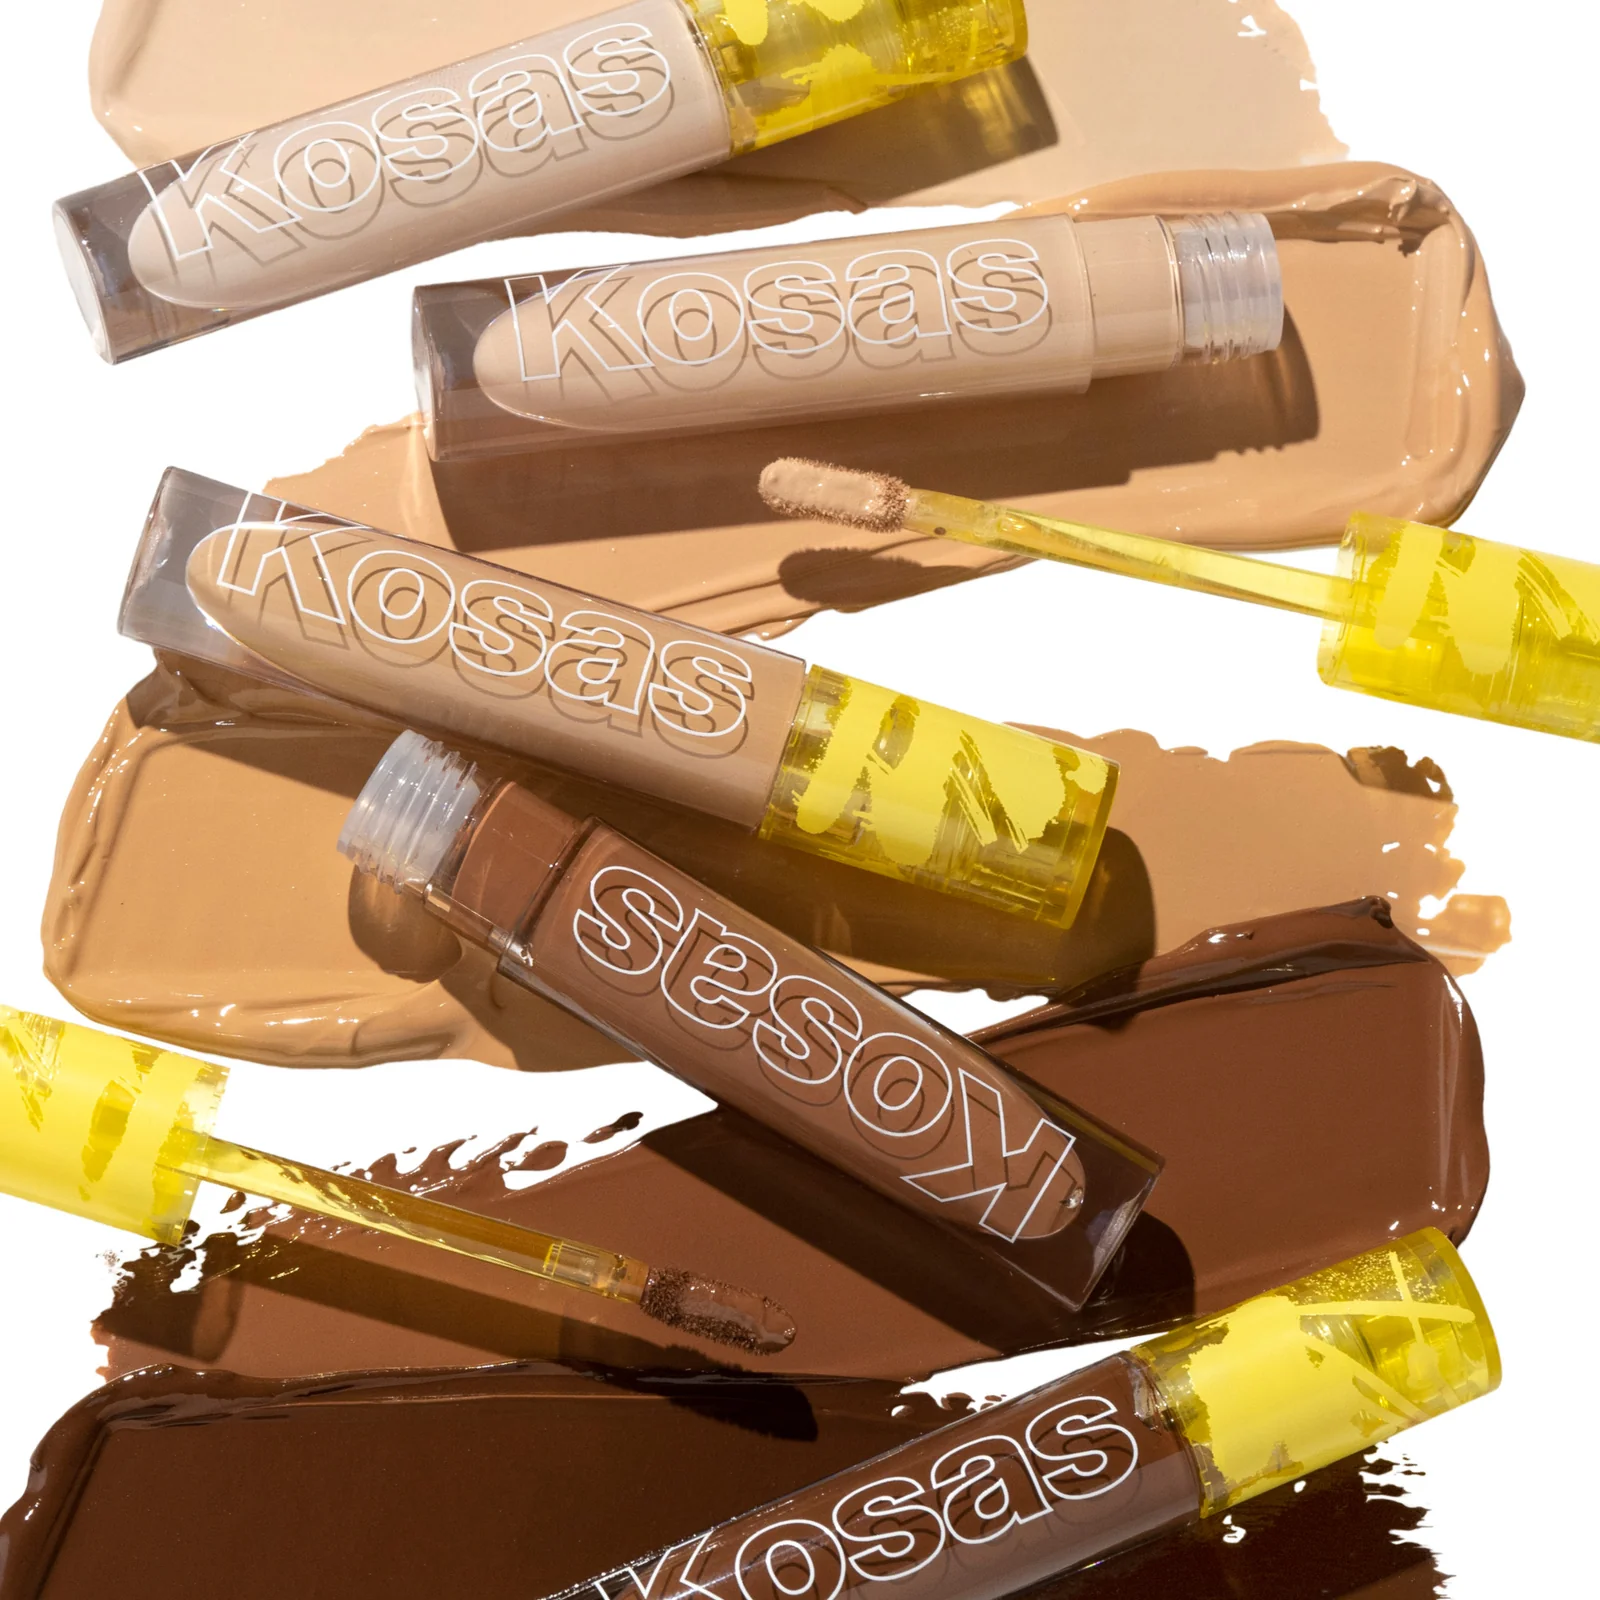 The Kosas Revealer Concealer not only cares for your skin, but also prevents your face from caking